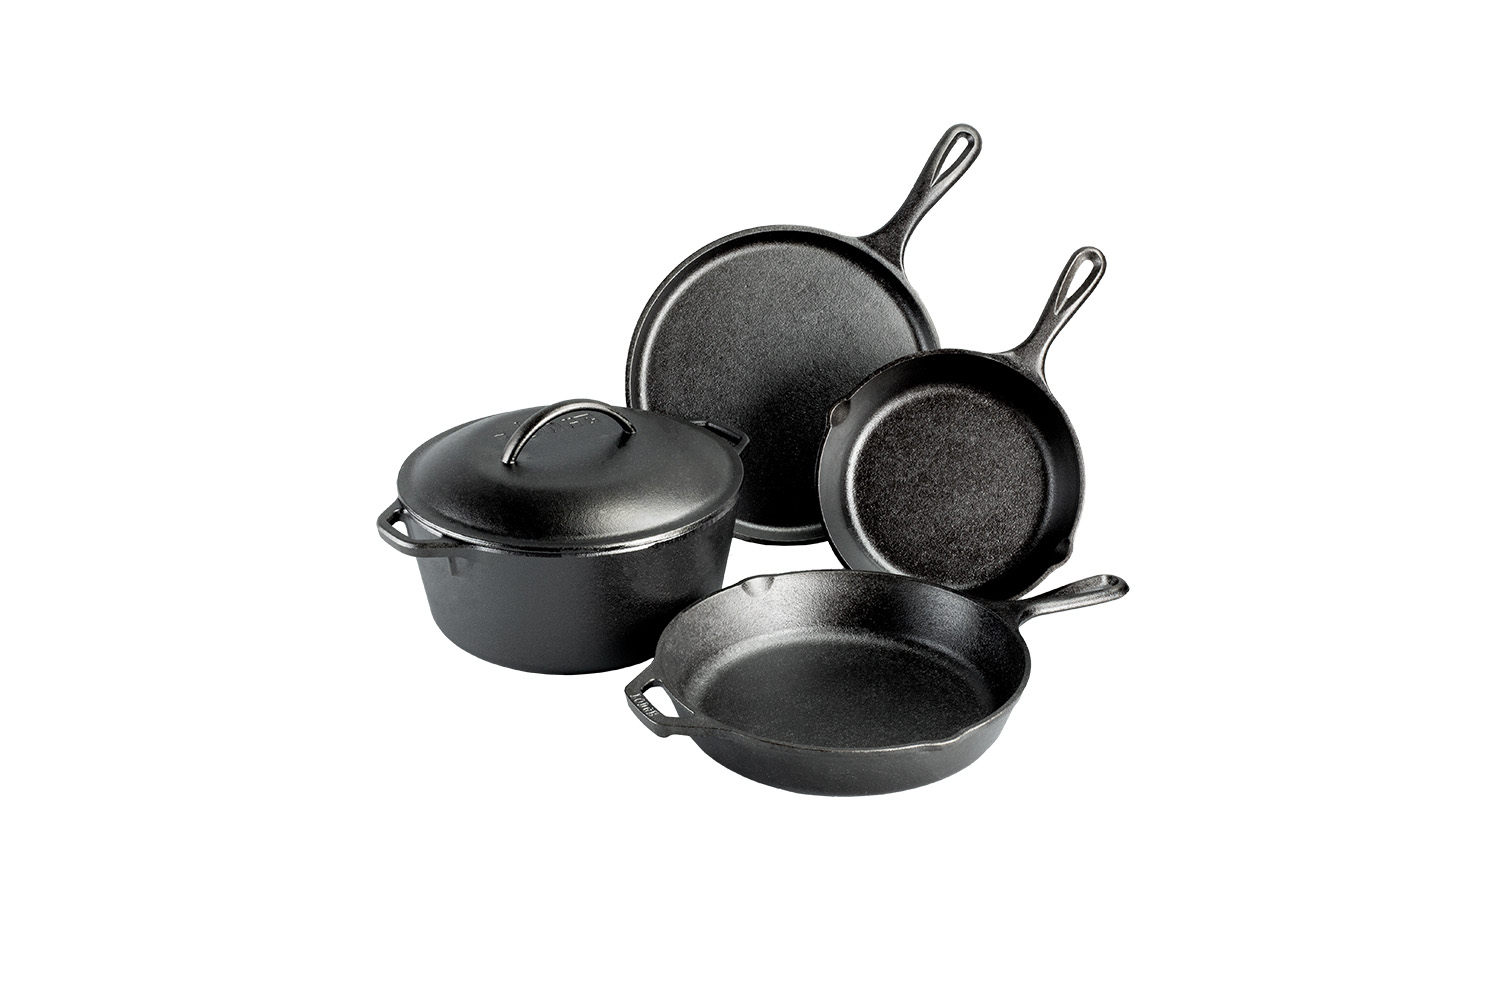 the lodge seasoned cast iron 5 piece set is \$84.90 at lodge. 18